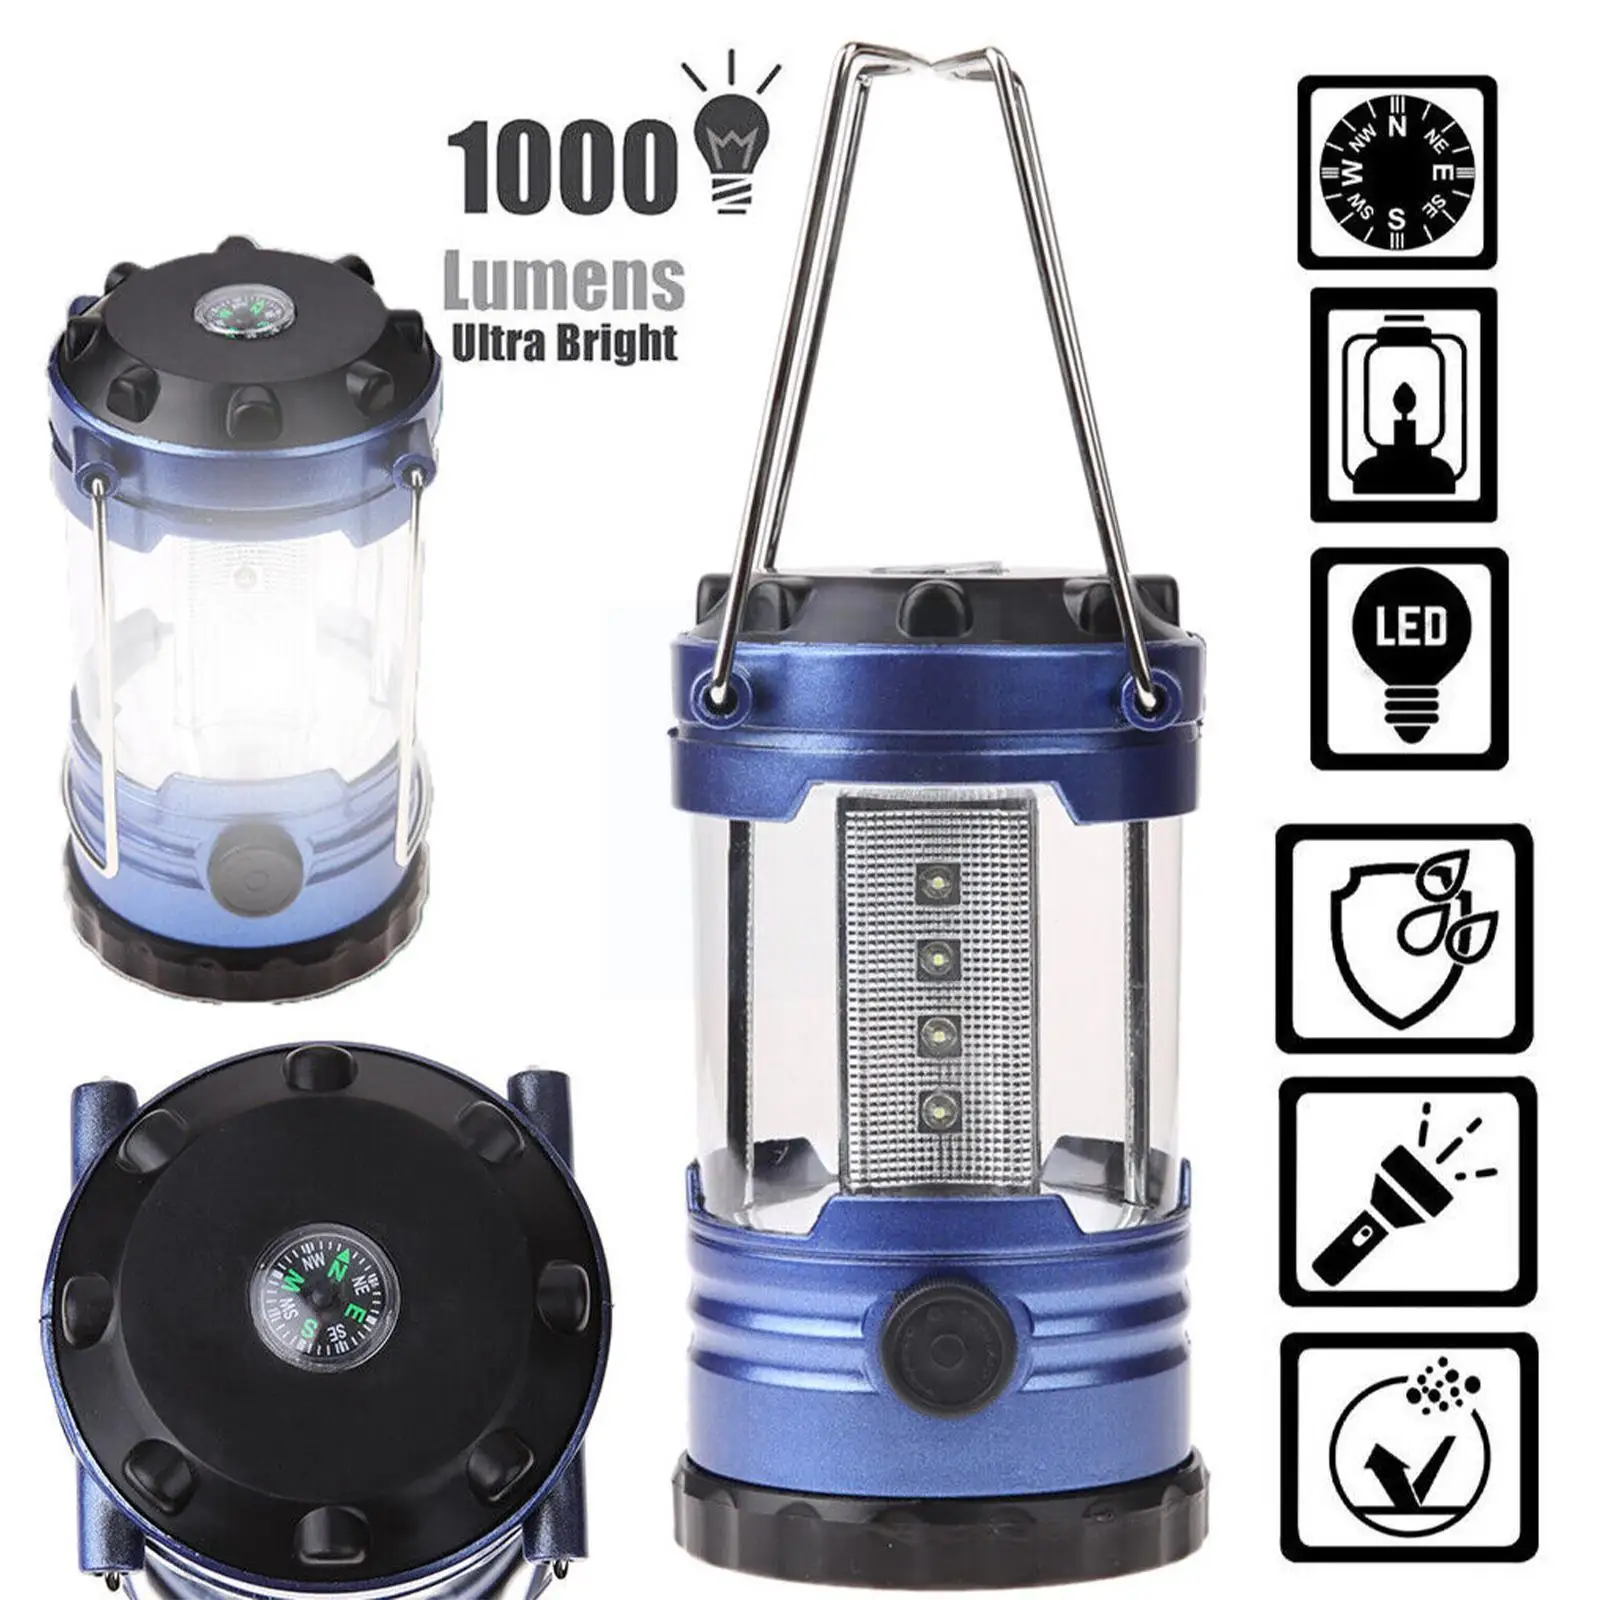 Portable Tent Lamp LED Portable Lantern TelescopicTorch Waterproof Camping 3*AAA Powered Working Light Light Lamp By Emerge H6U8